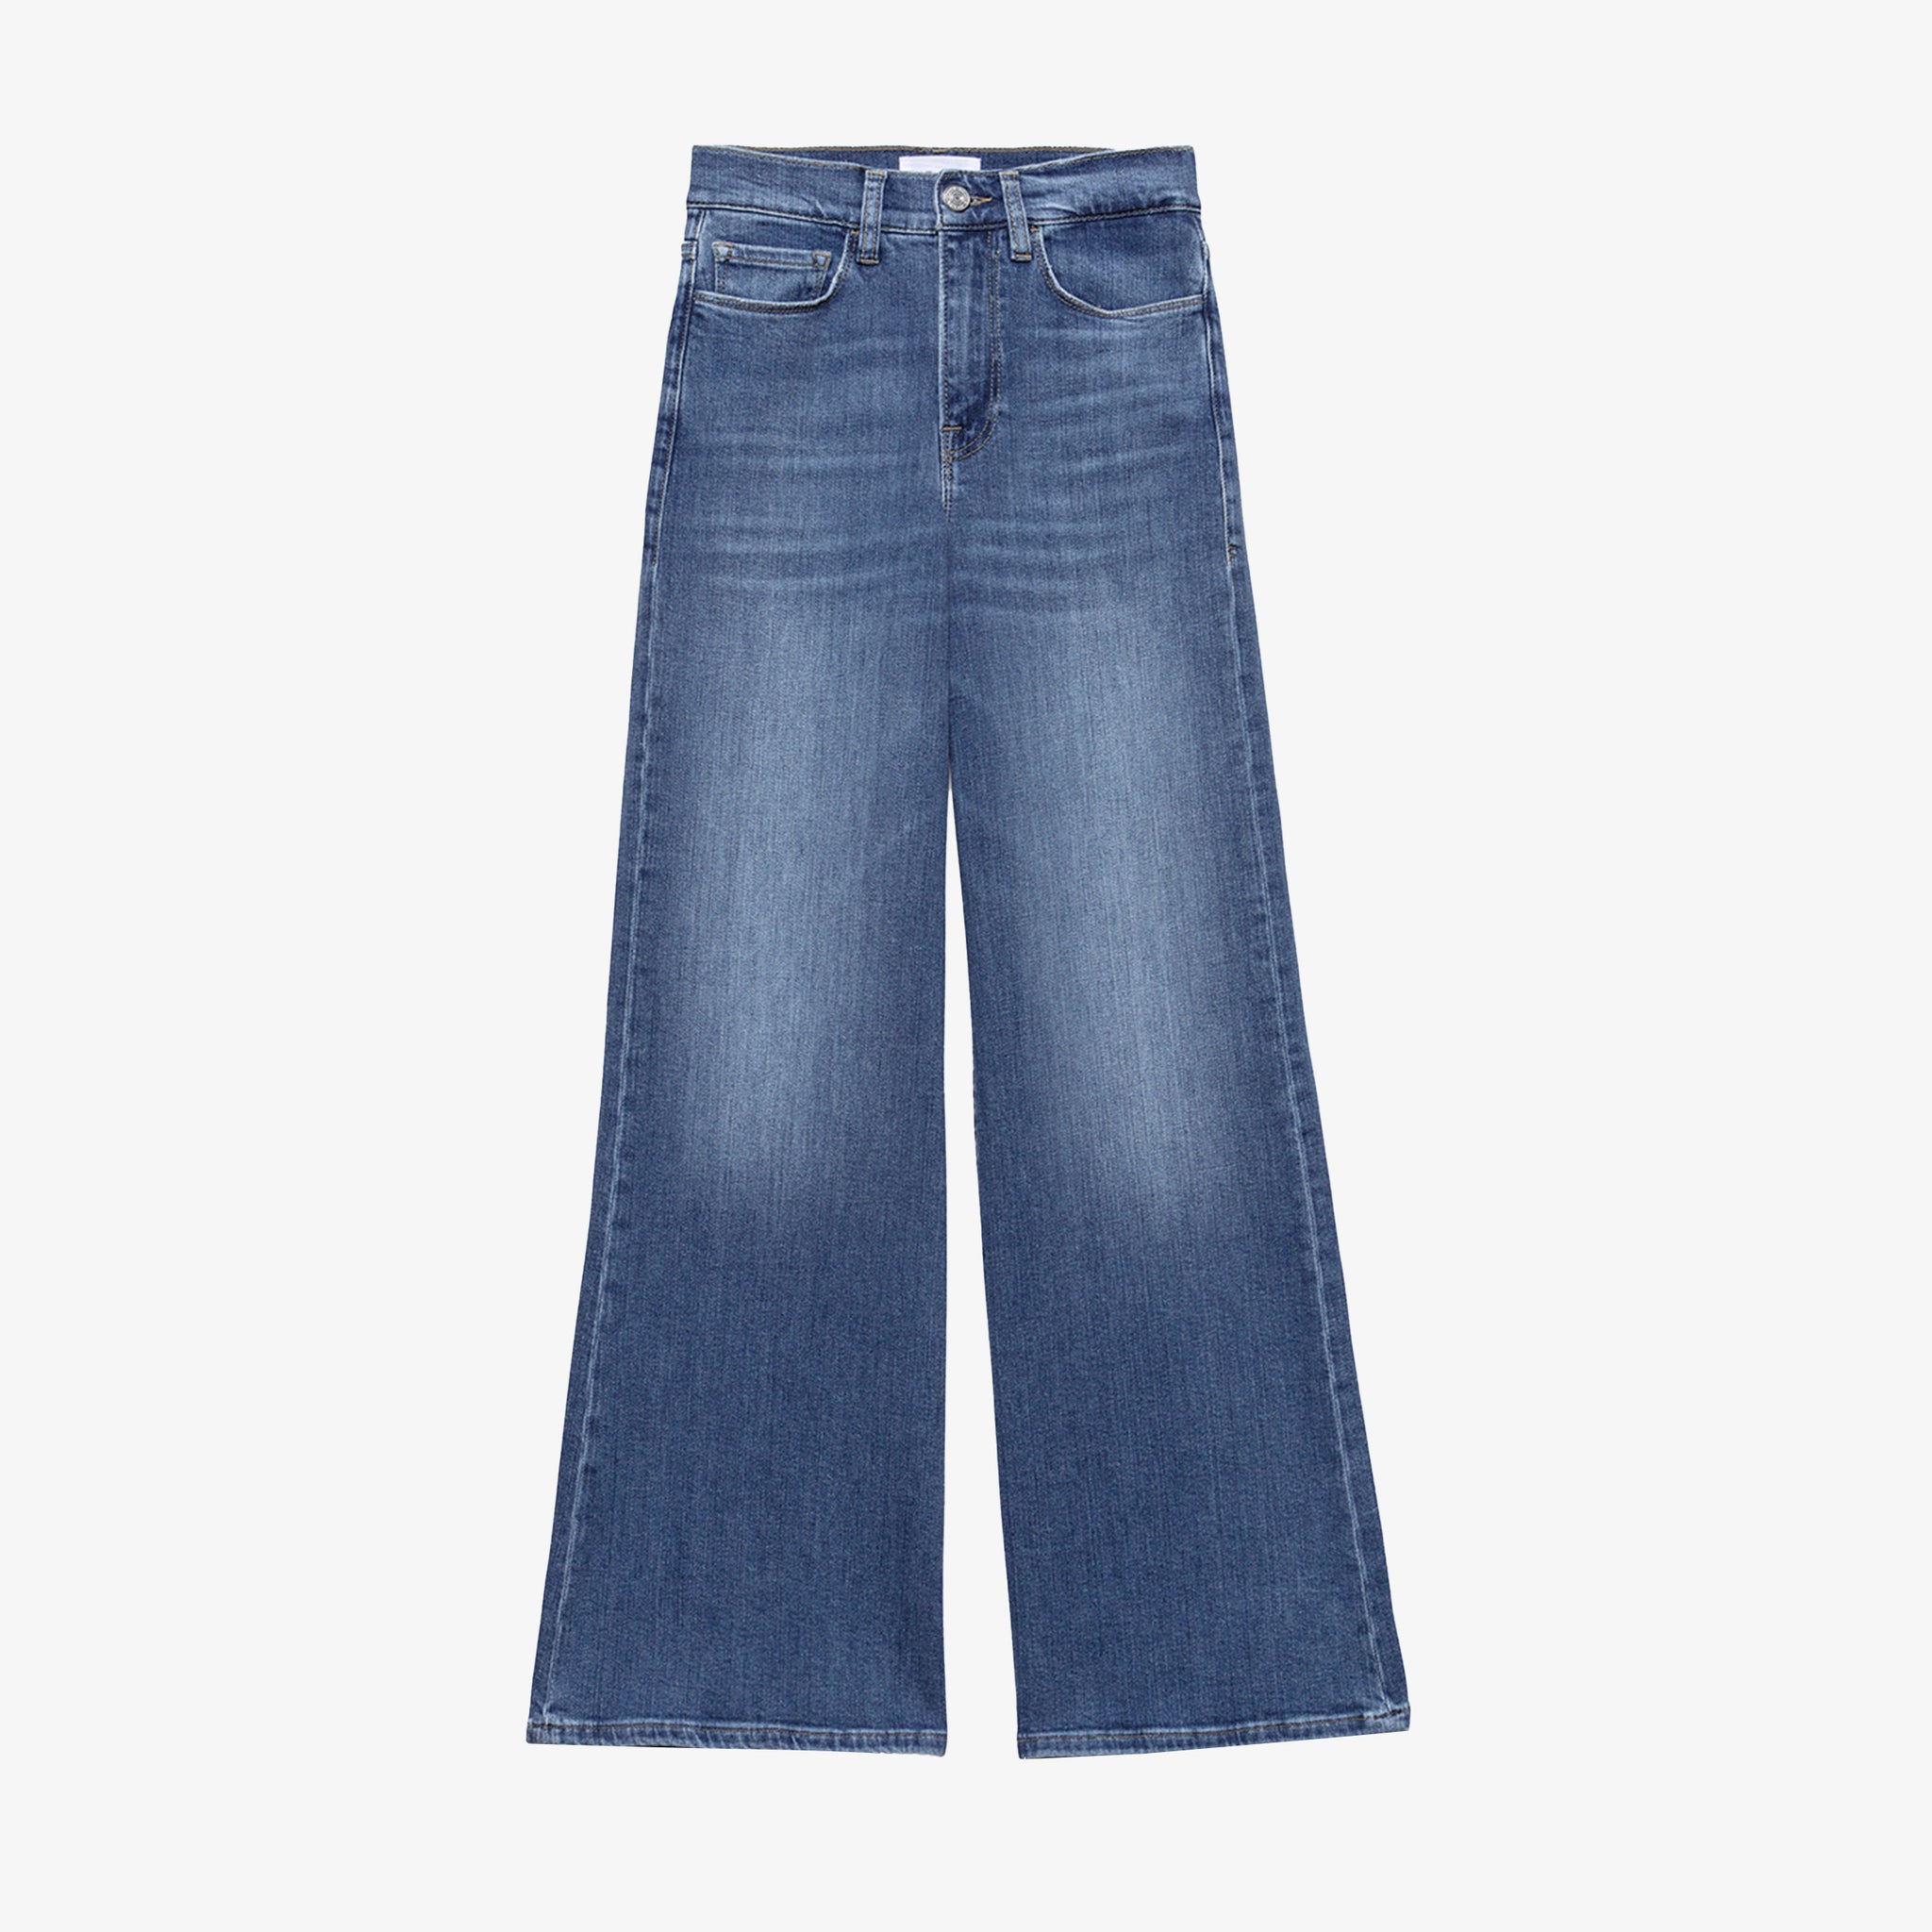 packshot image of the FRAME Le Slim Palazzo Jeans in Drizzle